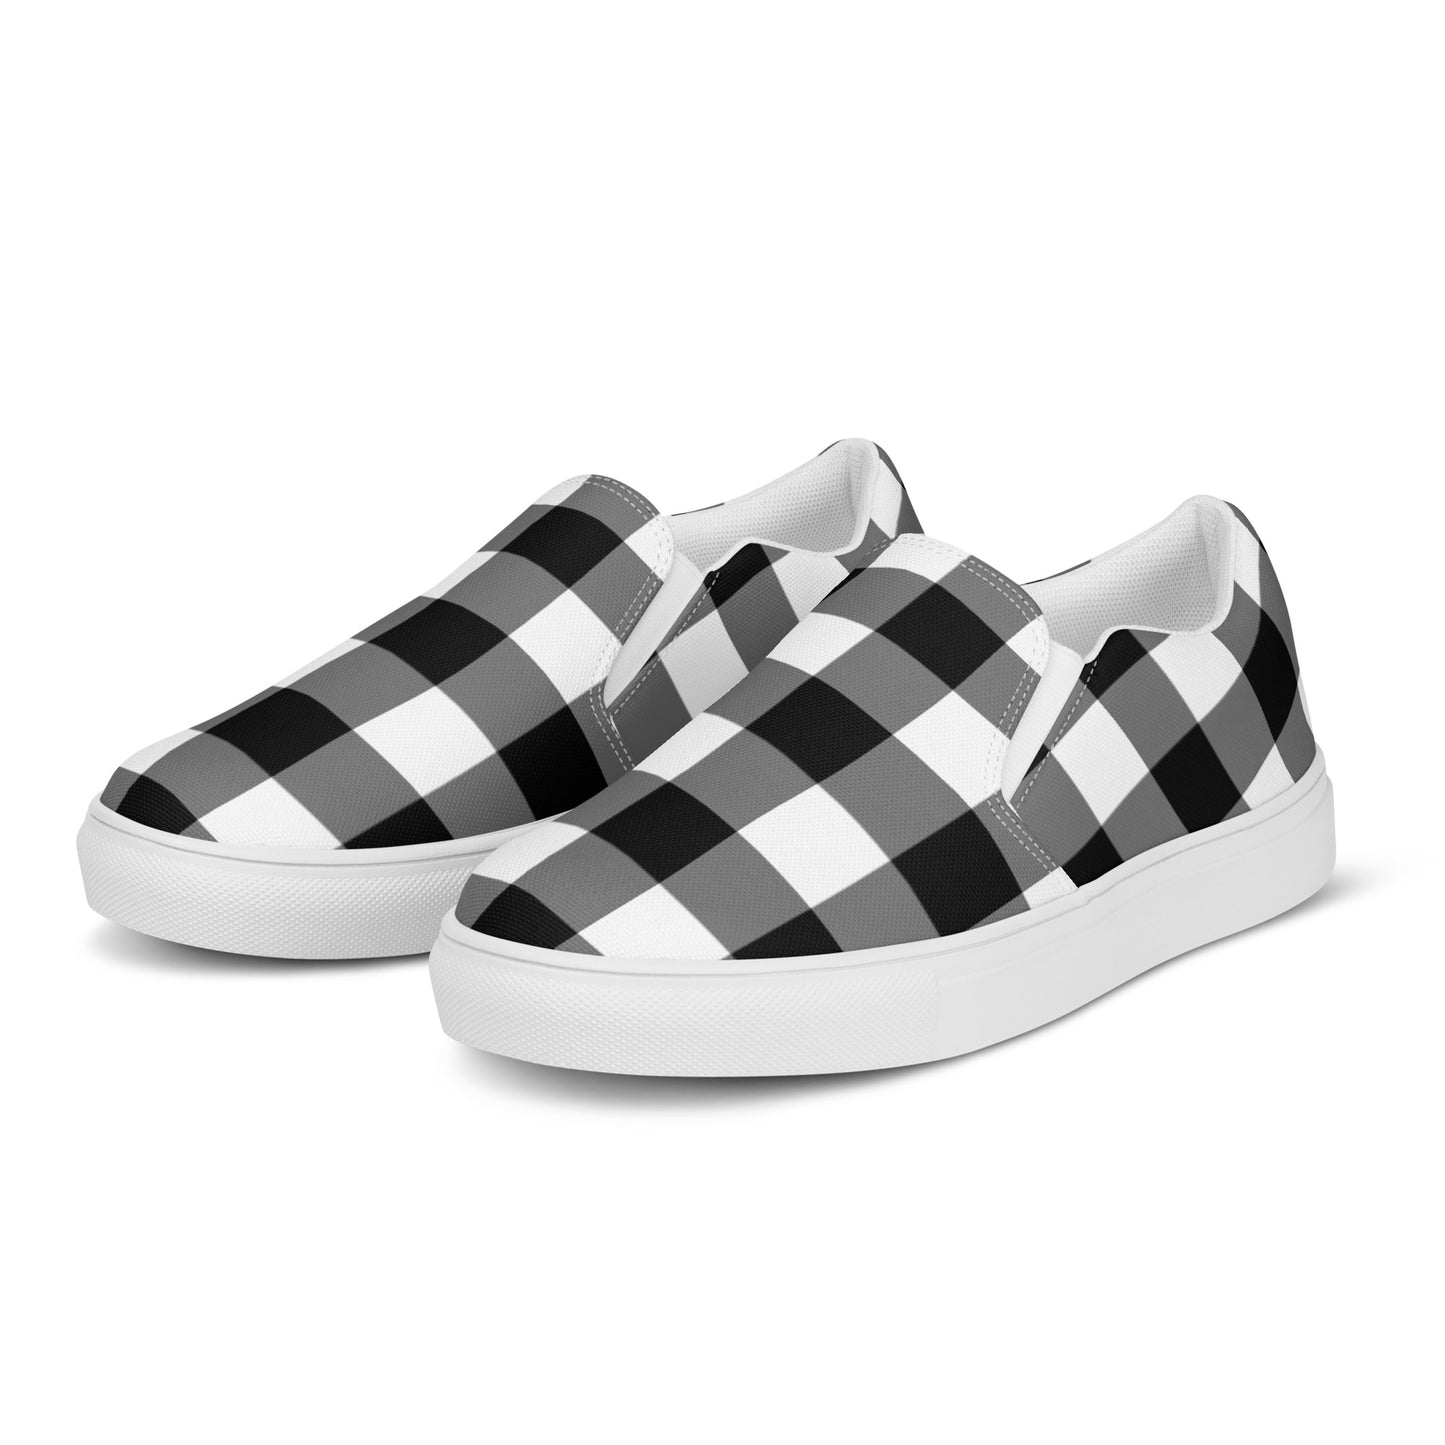 Badass Black Gingham Women’s Canvas Slip-On Flat Deck Shoe | Pinup Couture Relaxed